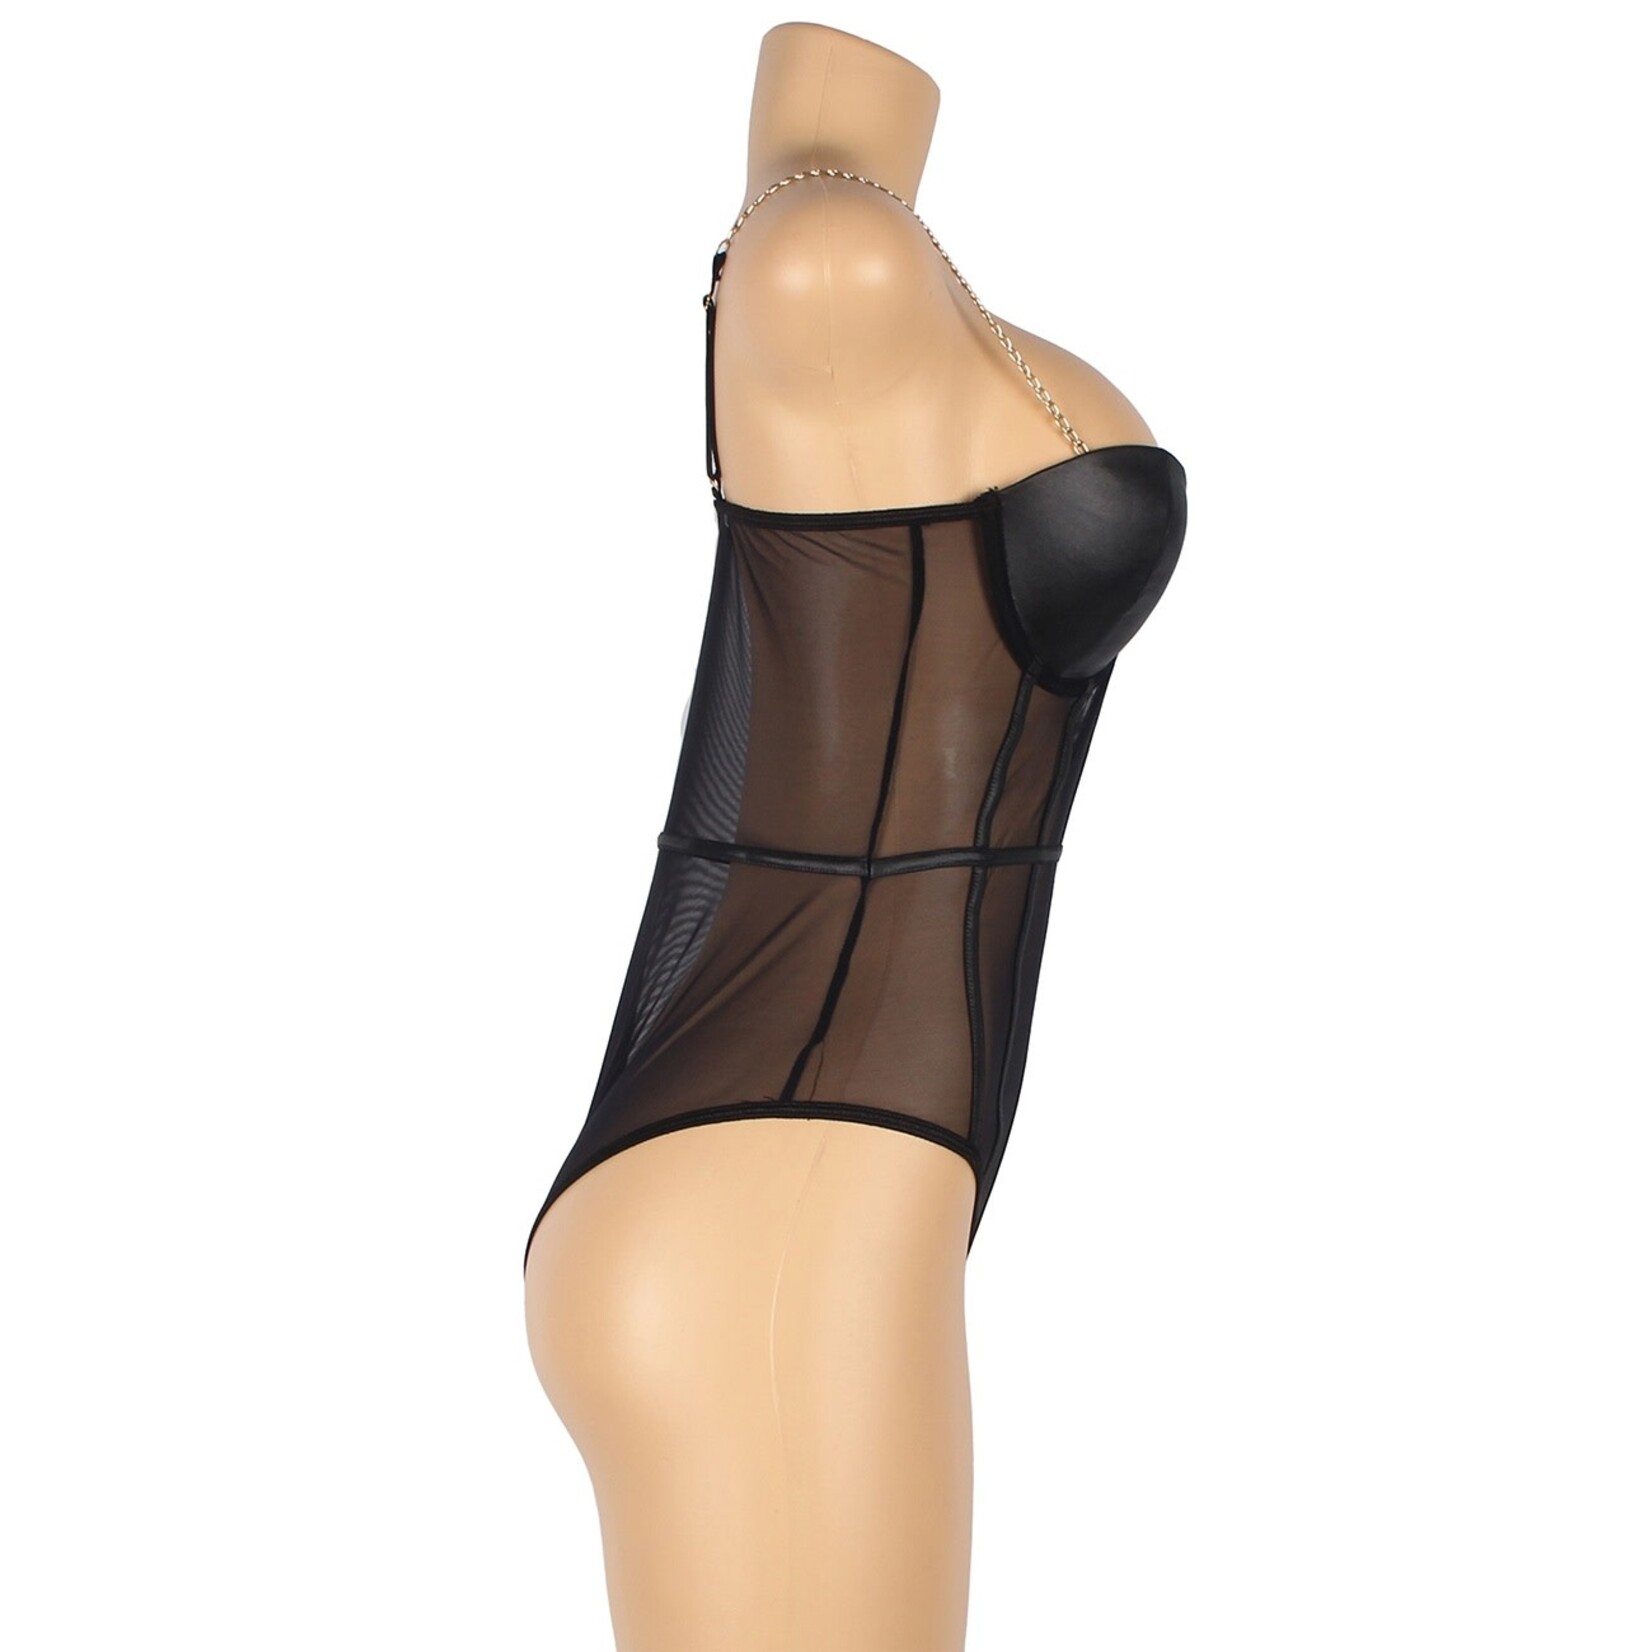 OH YEAH! -  ONE PIECE METAL STRAP SEE THROUGH UNDERWIRE BODYSUIT XS-S